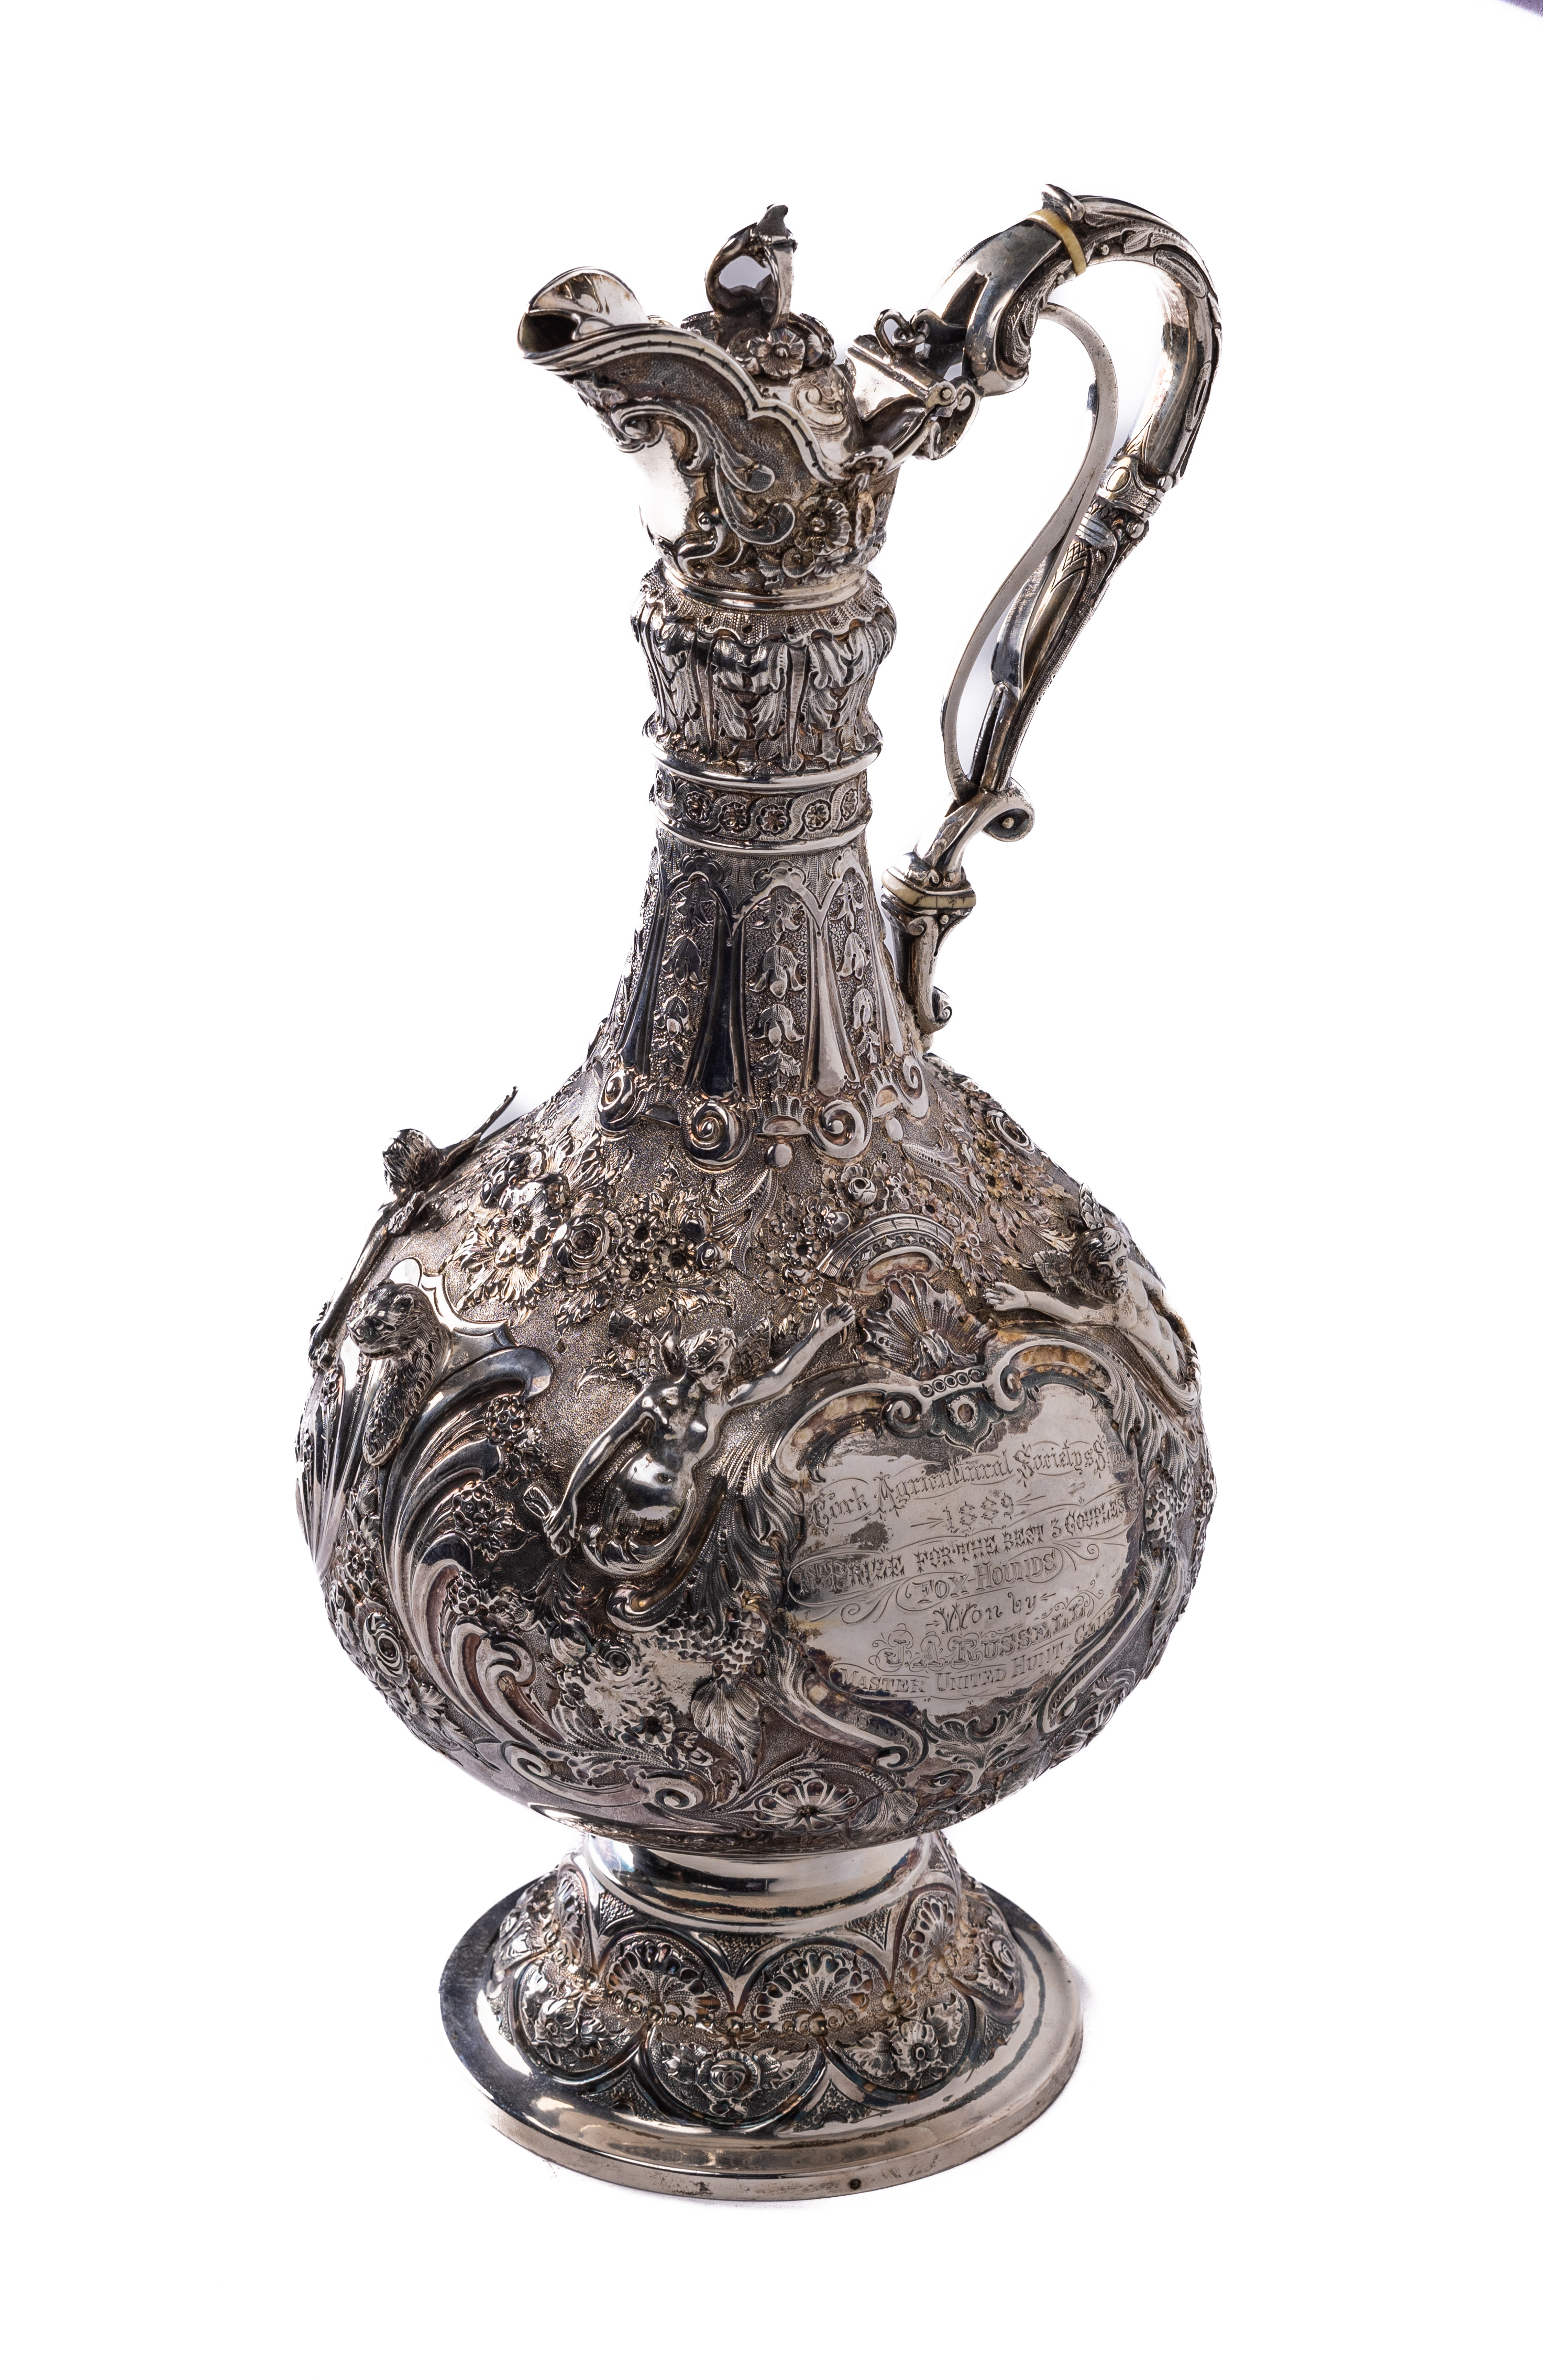 Co. Cork Interest: An exceptionally fine quality mid-Victorian silver Claret Jug, by Richard